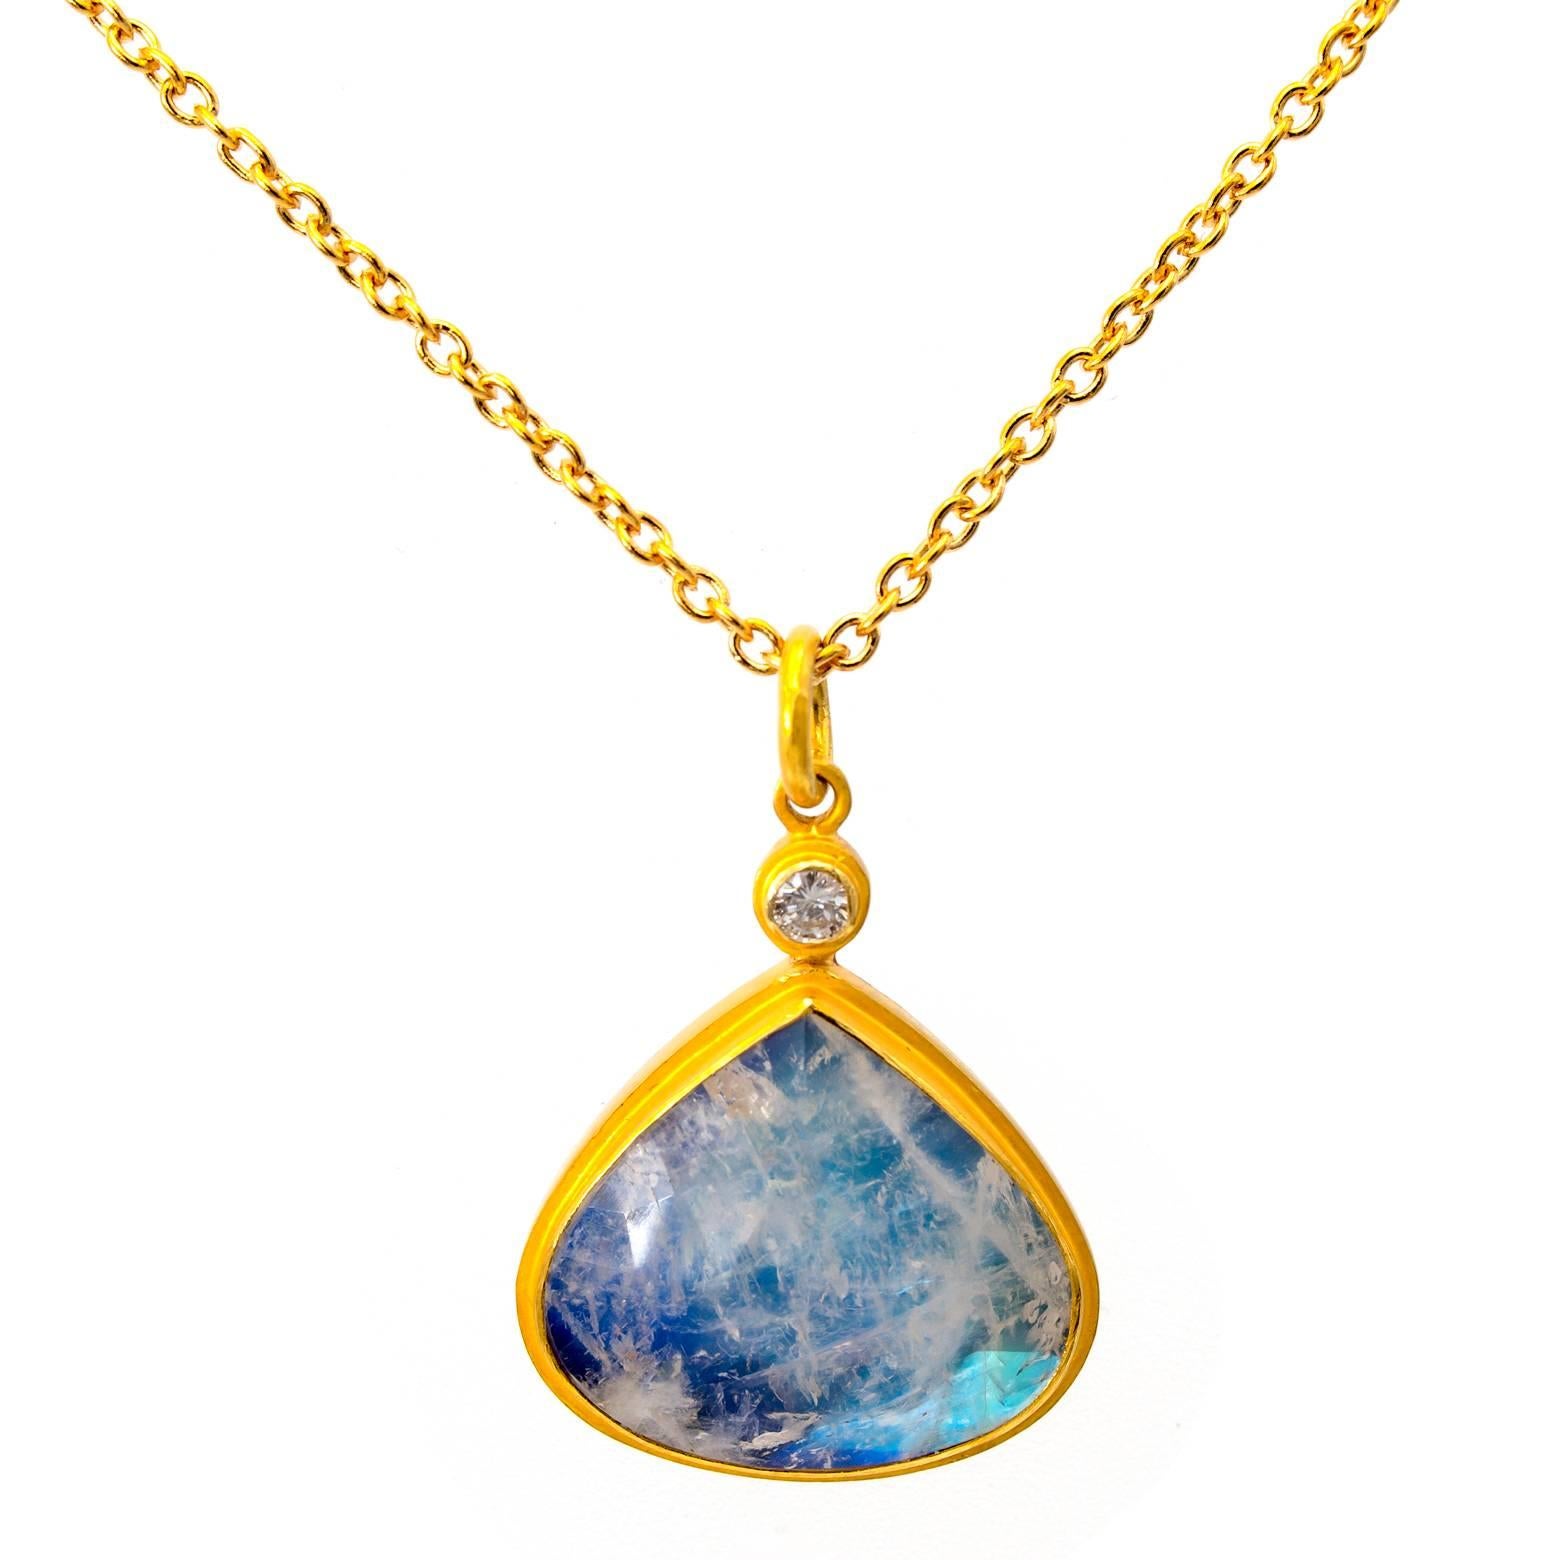 White swirls of cloud-like moonstone dance around a backdrop of bright iridescent blue creating a pendant masterpiece. Rainbow moonstone is a shiny blue color with icy white inclusions that reflect and refract light in many directions. This piece is